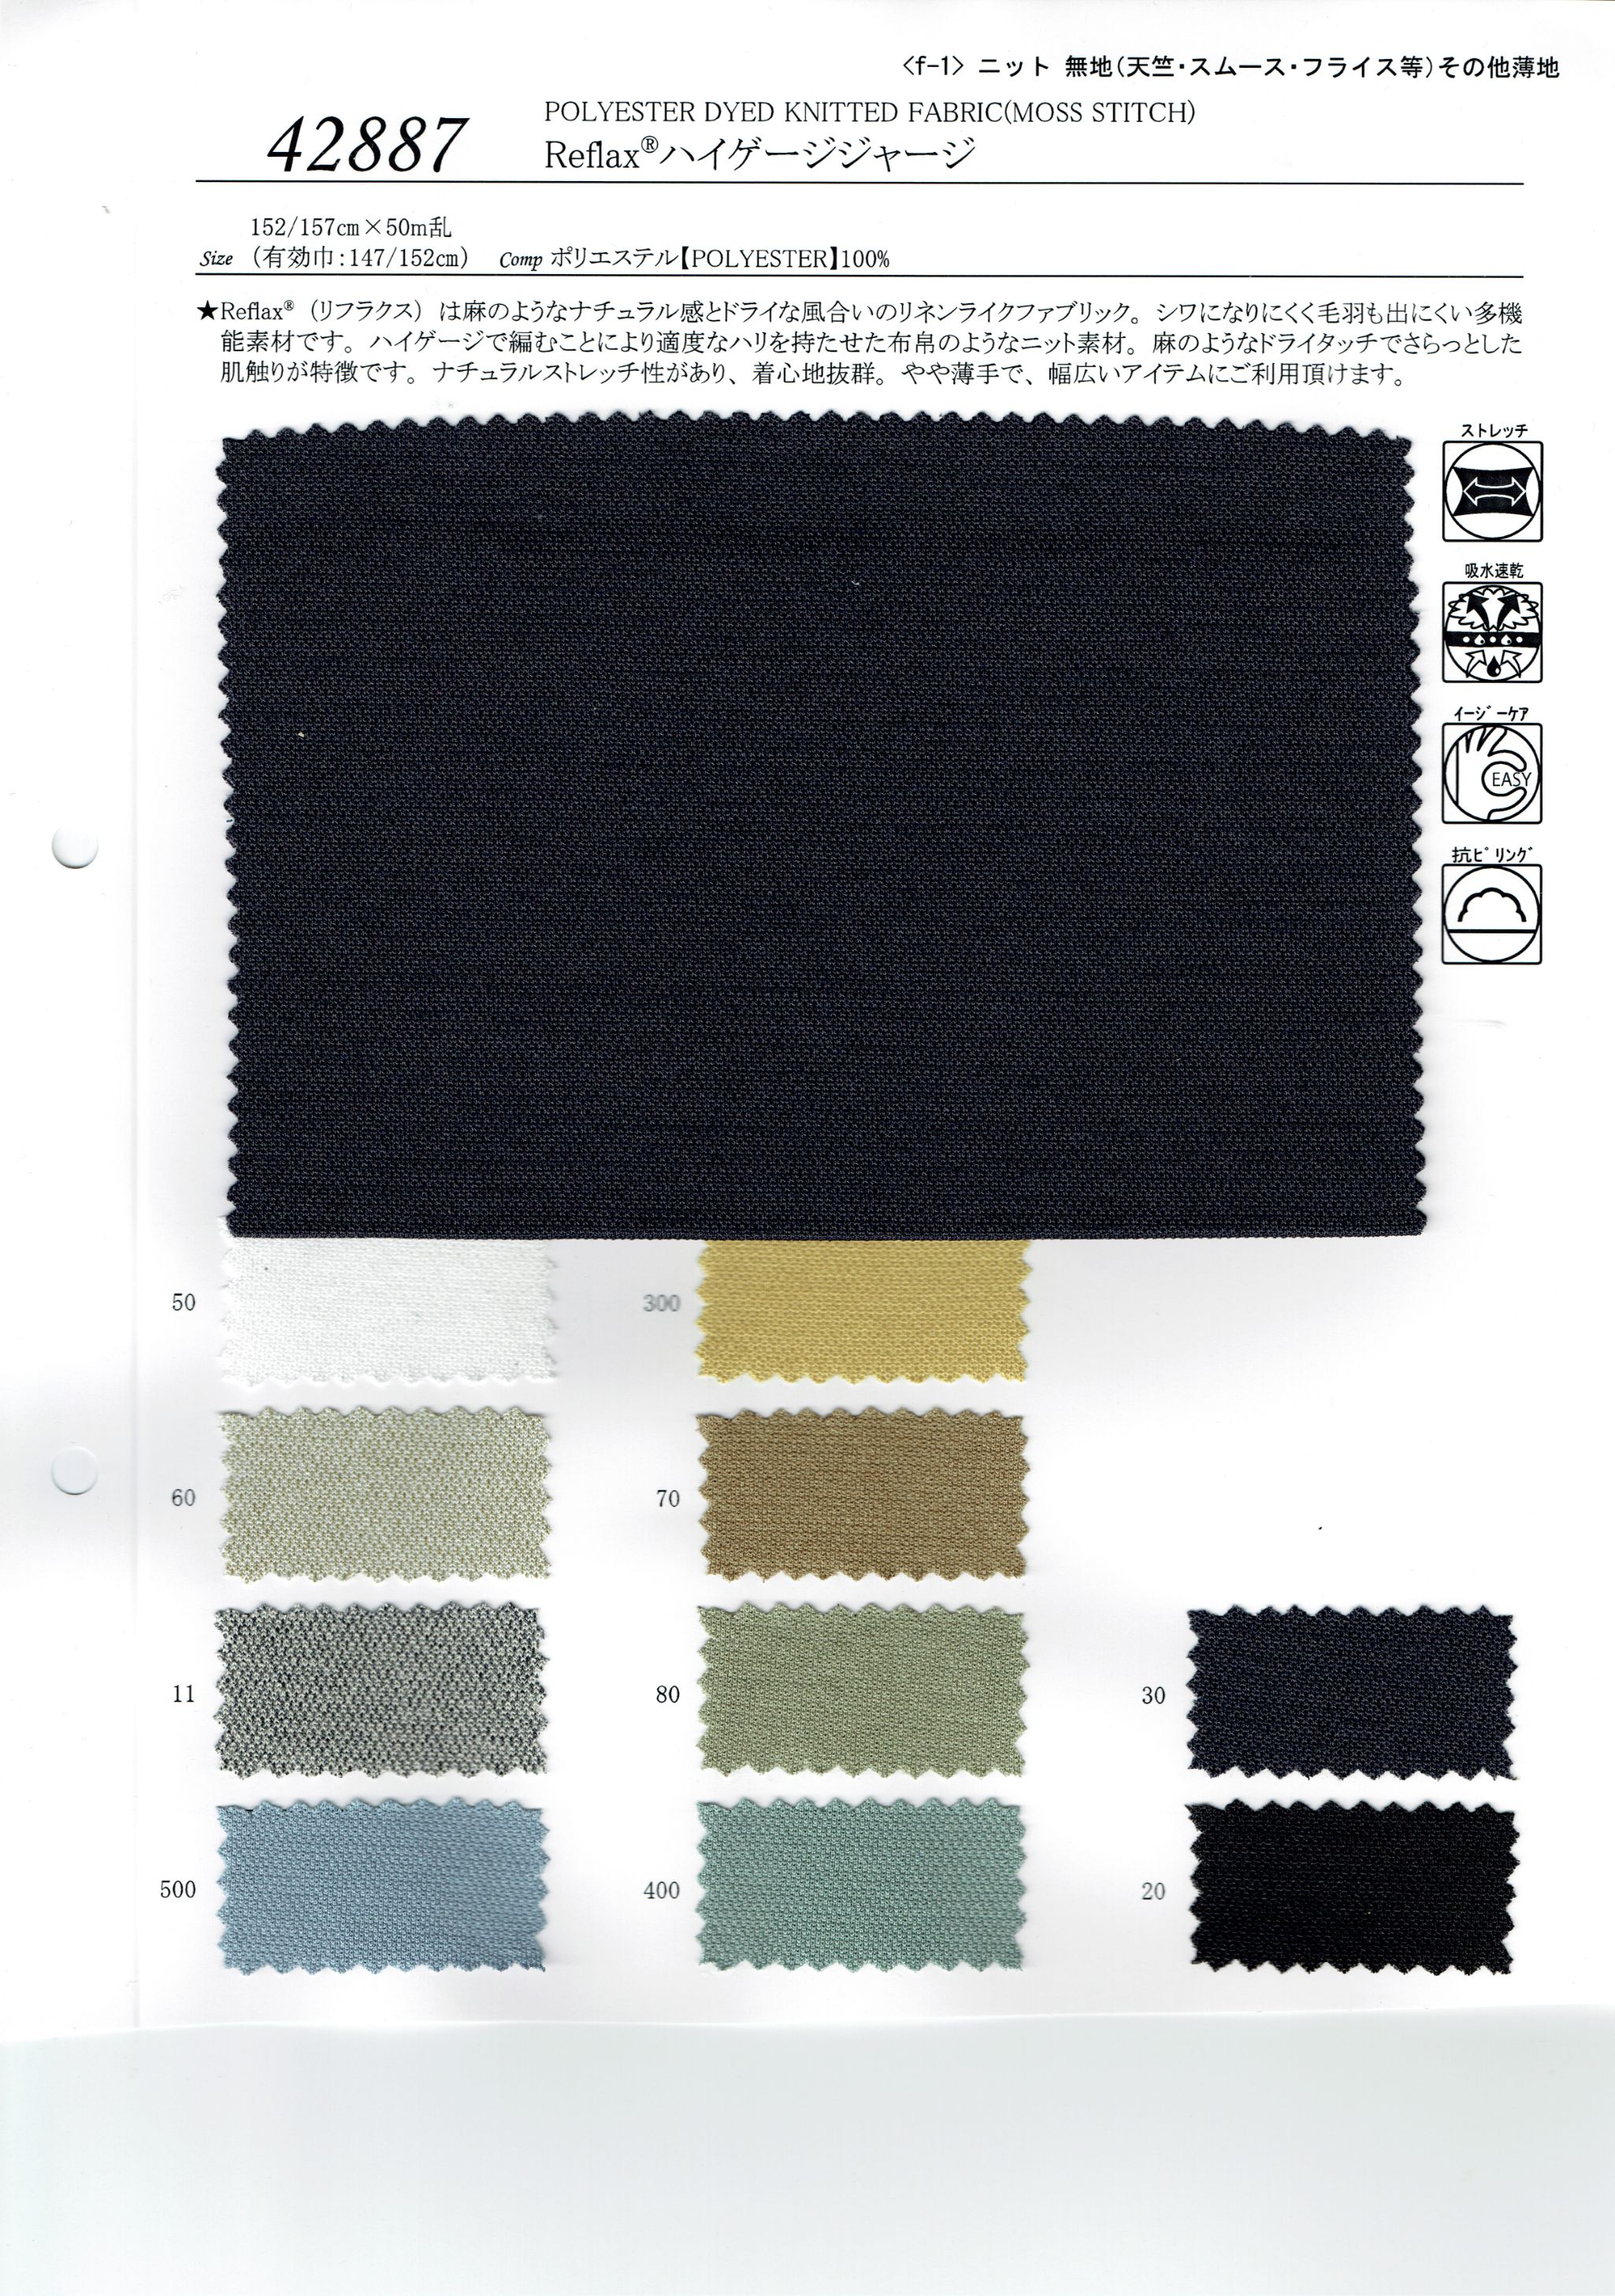 View POLYESTER100 DYED KNITTED FABRIC[MOSS STITCH] DYED KNITTED FABRIC[MOSS STITCH]